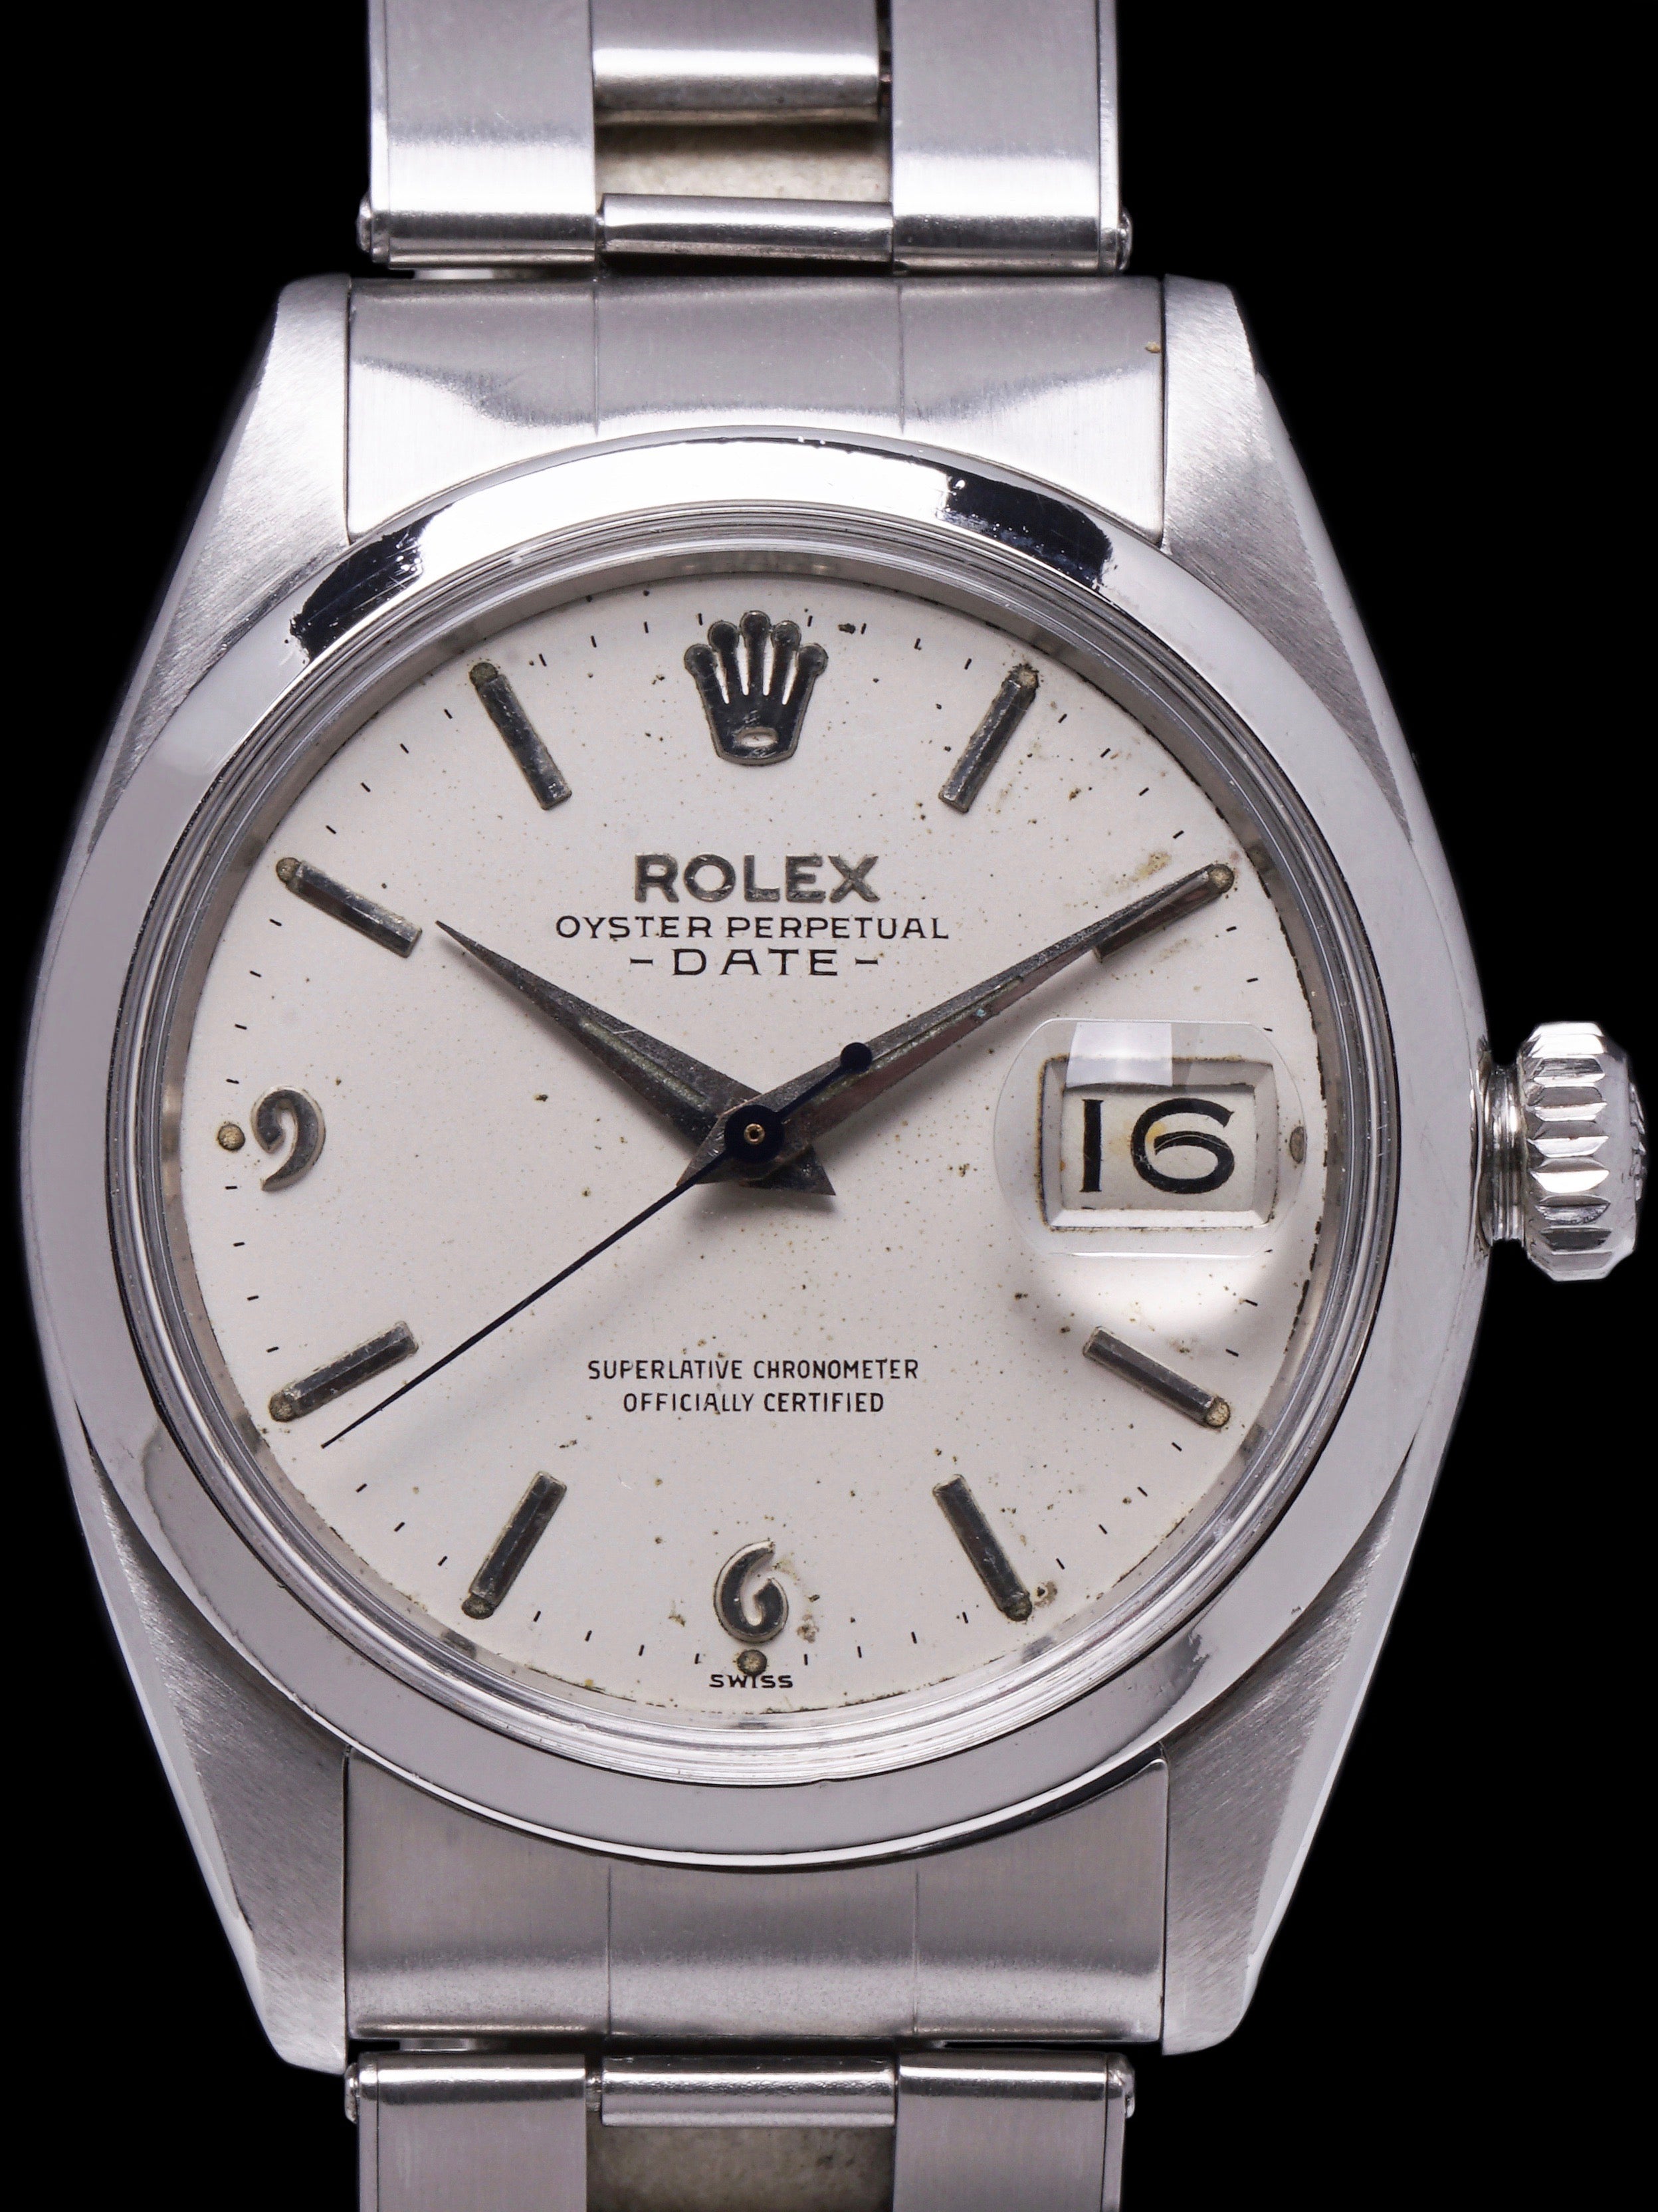 1960 Rolex Oyster-Perpetual Date (Ref. 1500) "SWISS" Only Arabic Dial